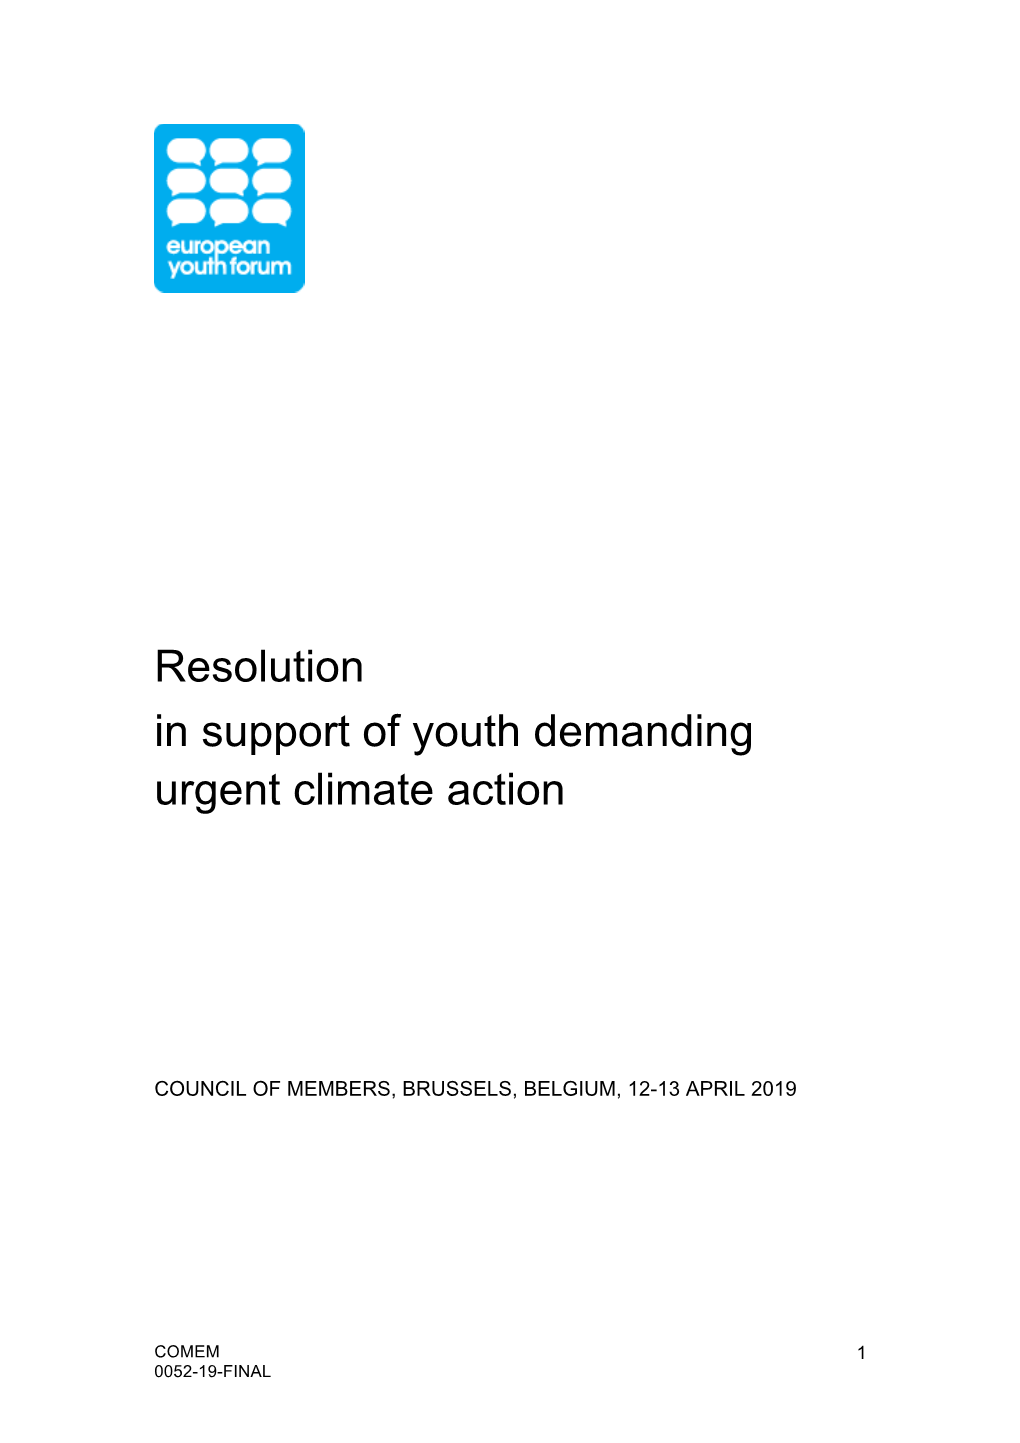 Resolution in Support of Youth Demanding Urgent Climate Action